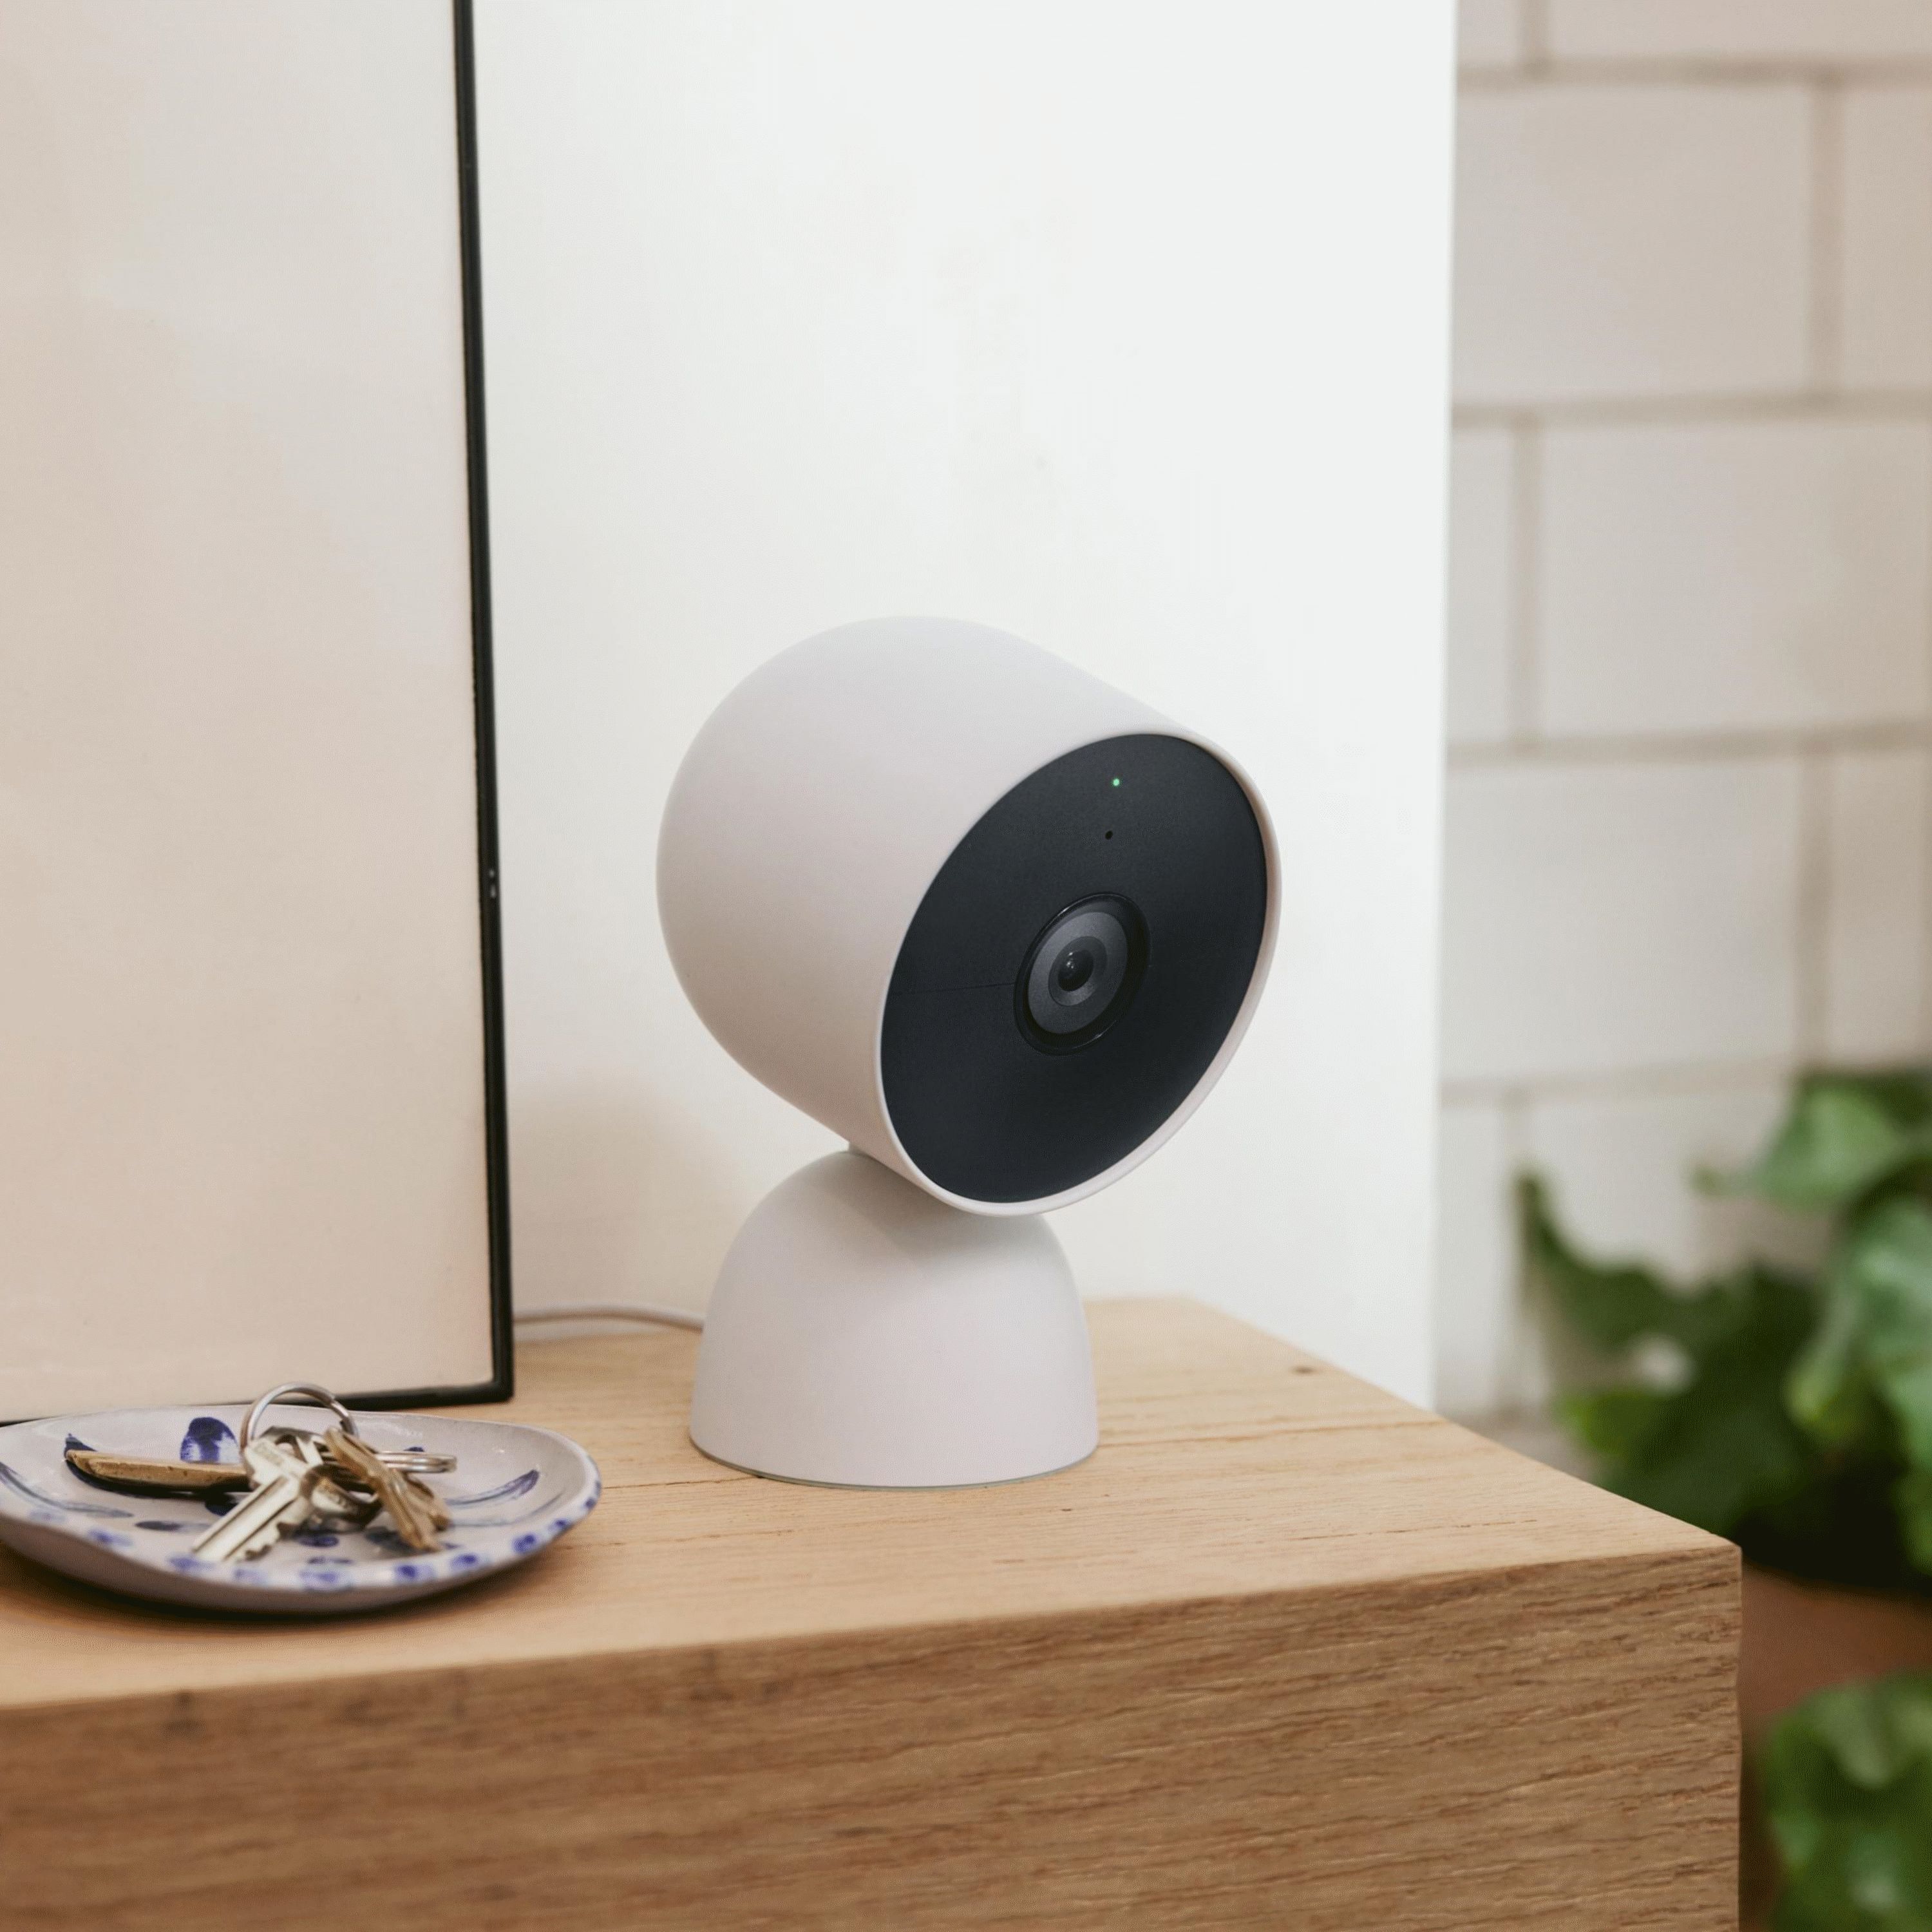 Google Nest Camera stand & cable